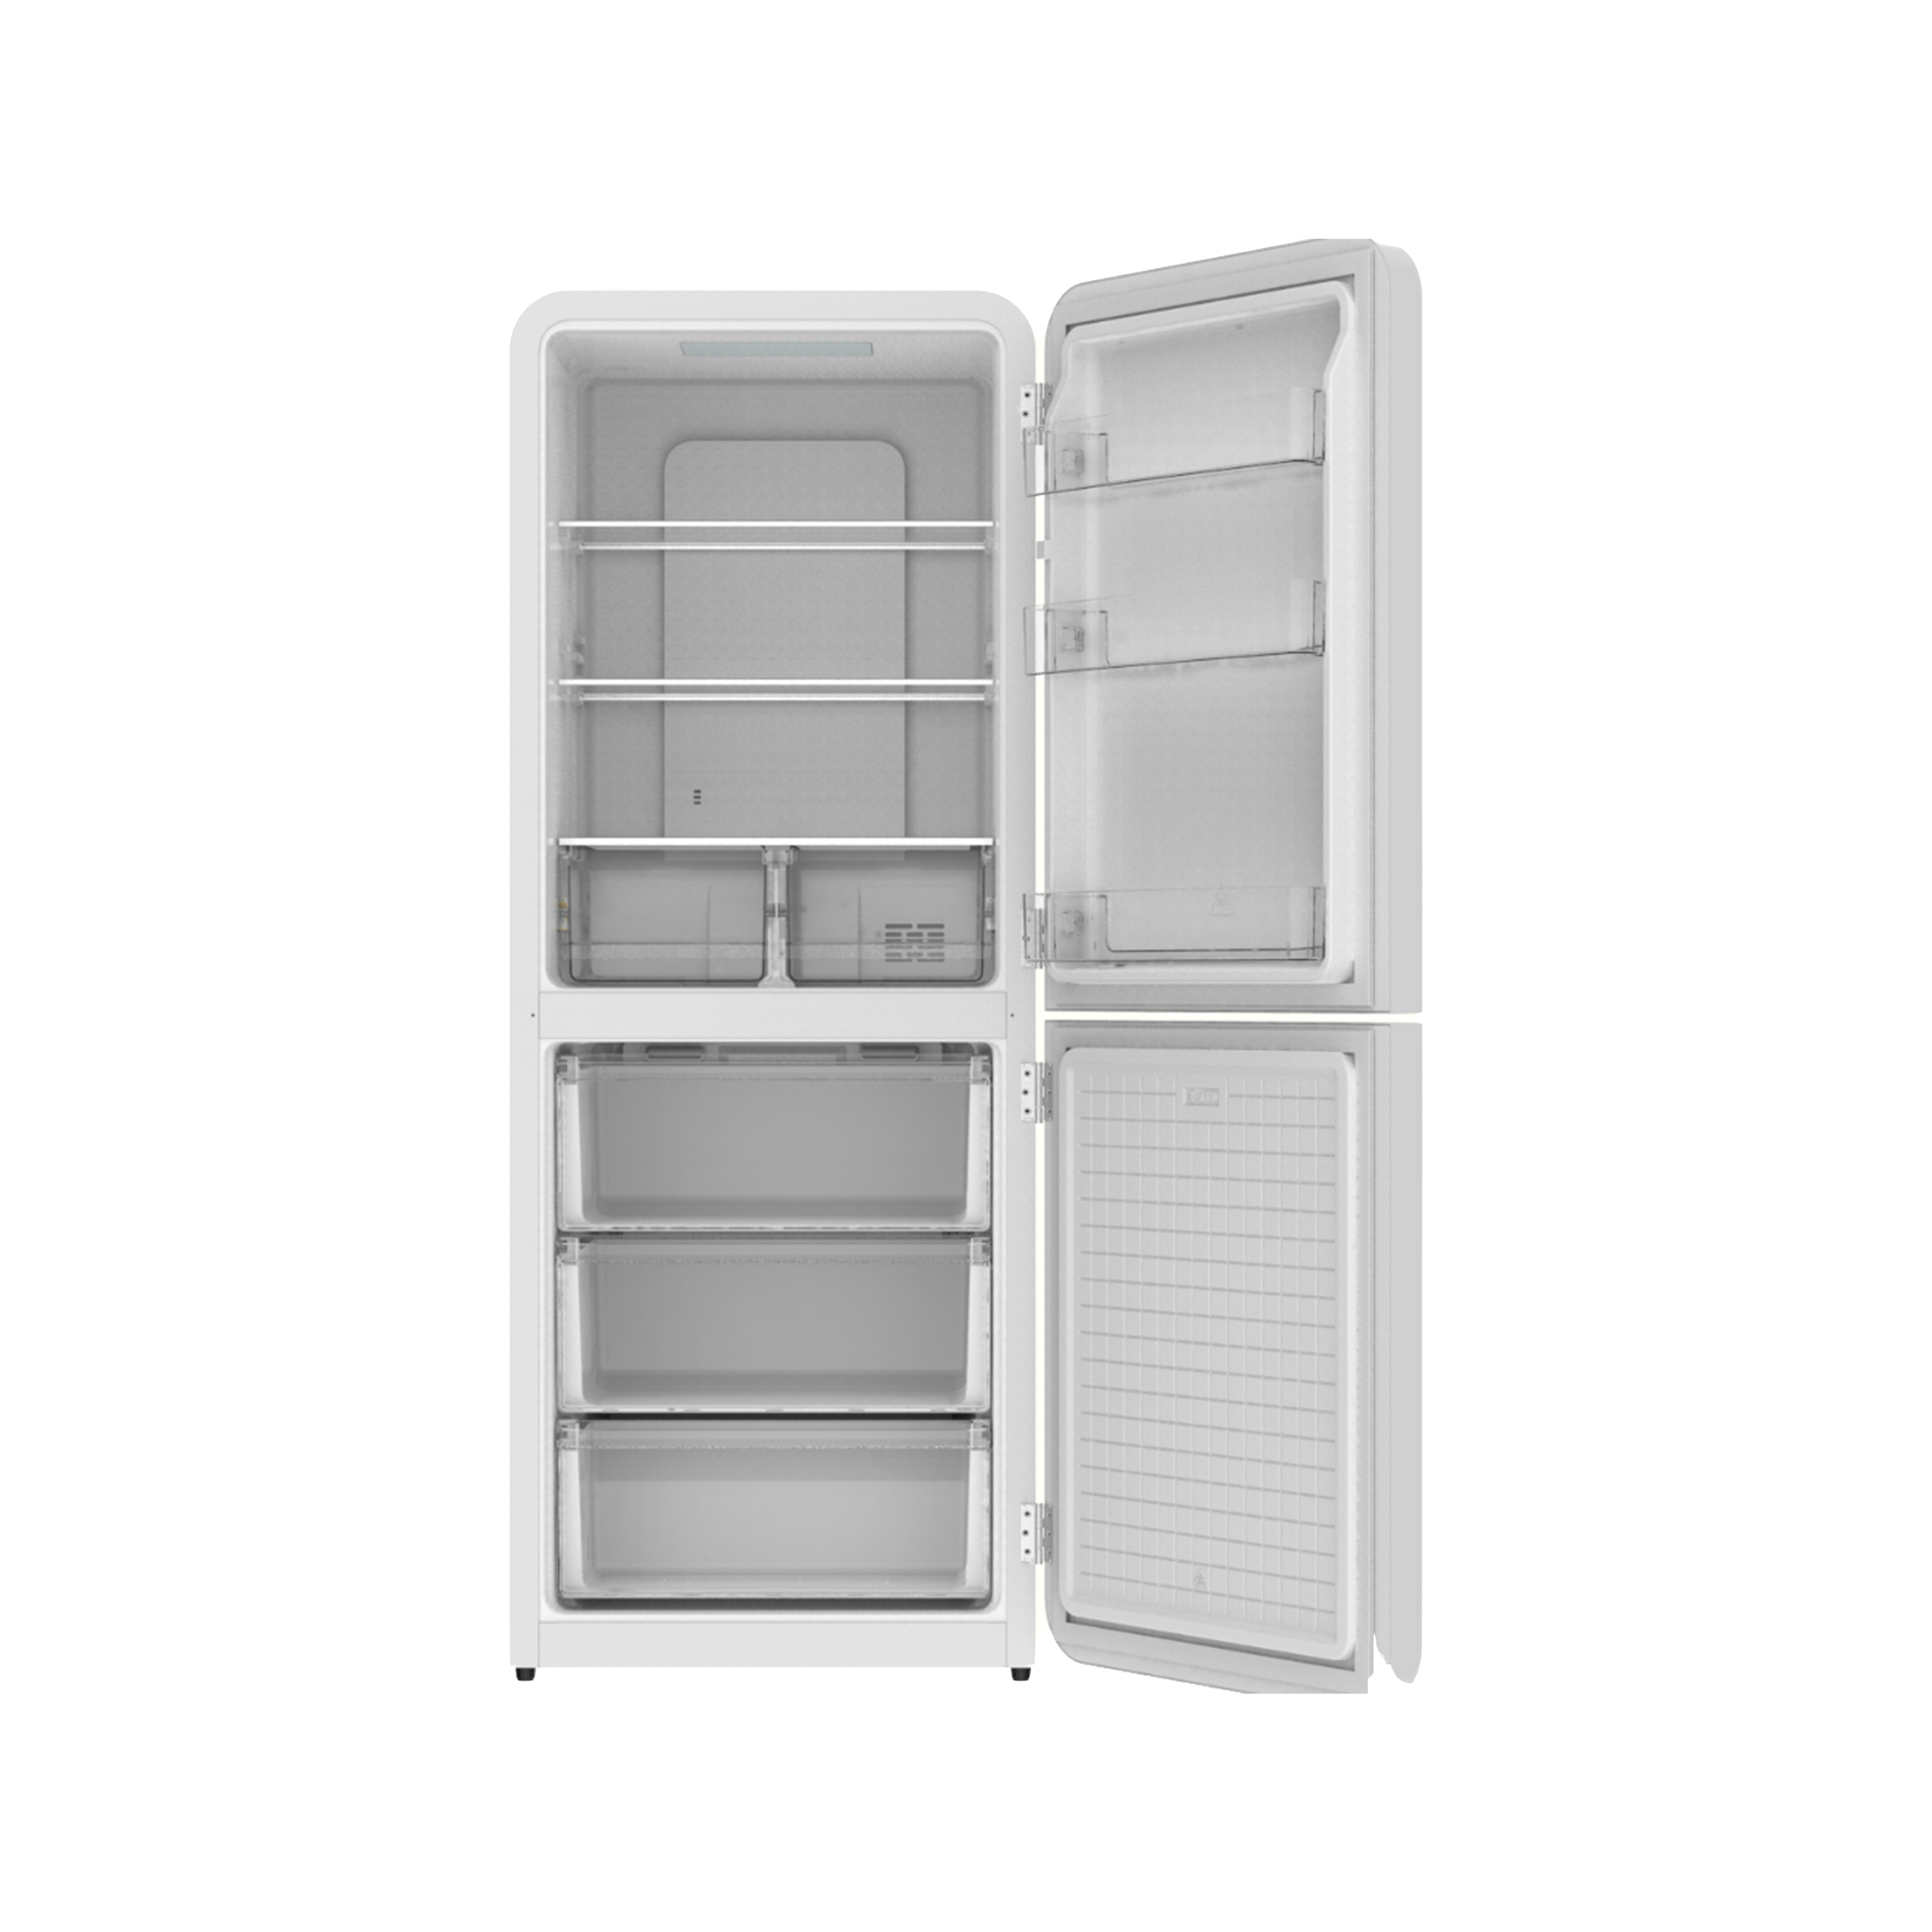 The front view of 14.1 Cu Ft Bottom Freezer Iconic Retro Fridge with open door, showcasing the interior space